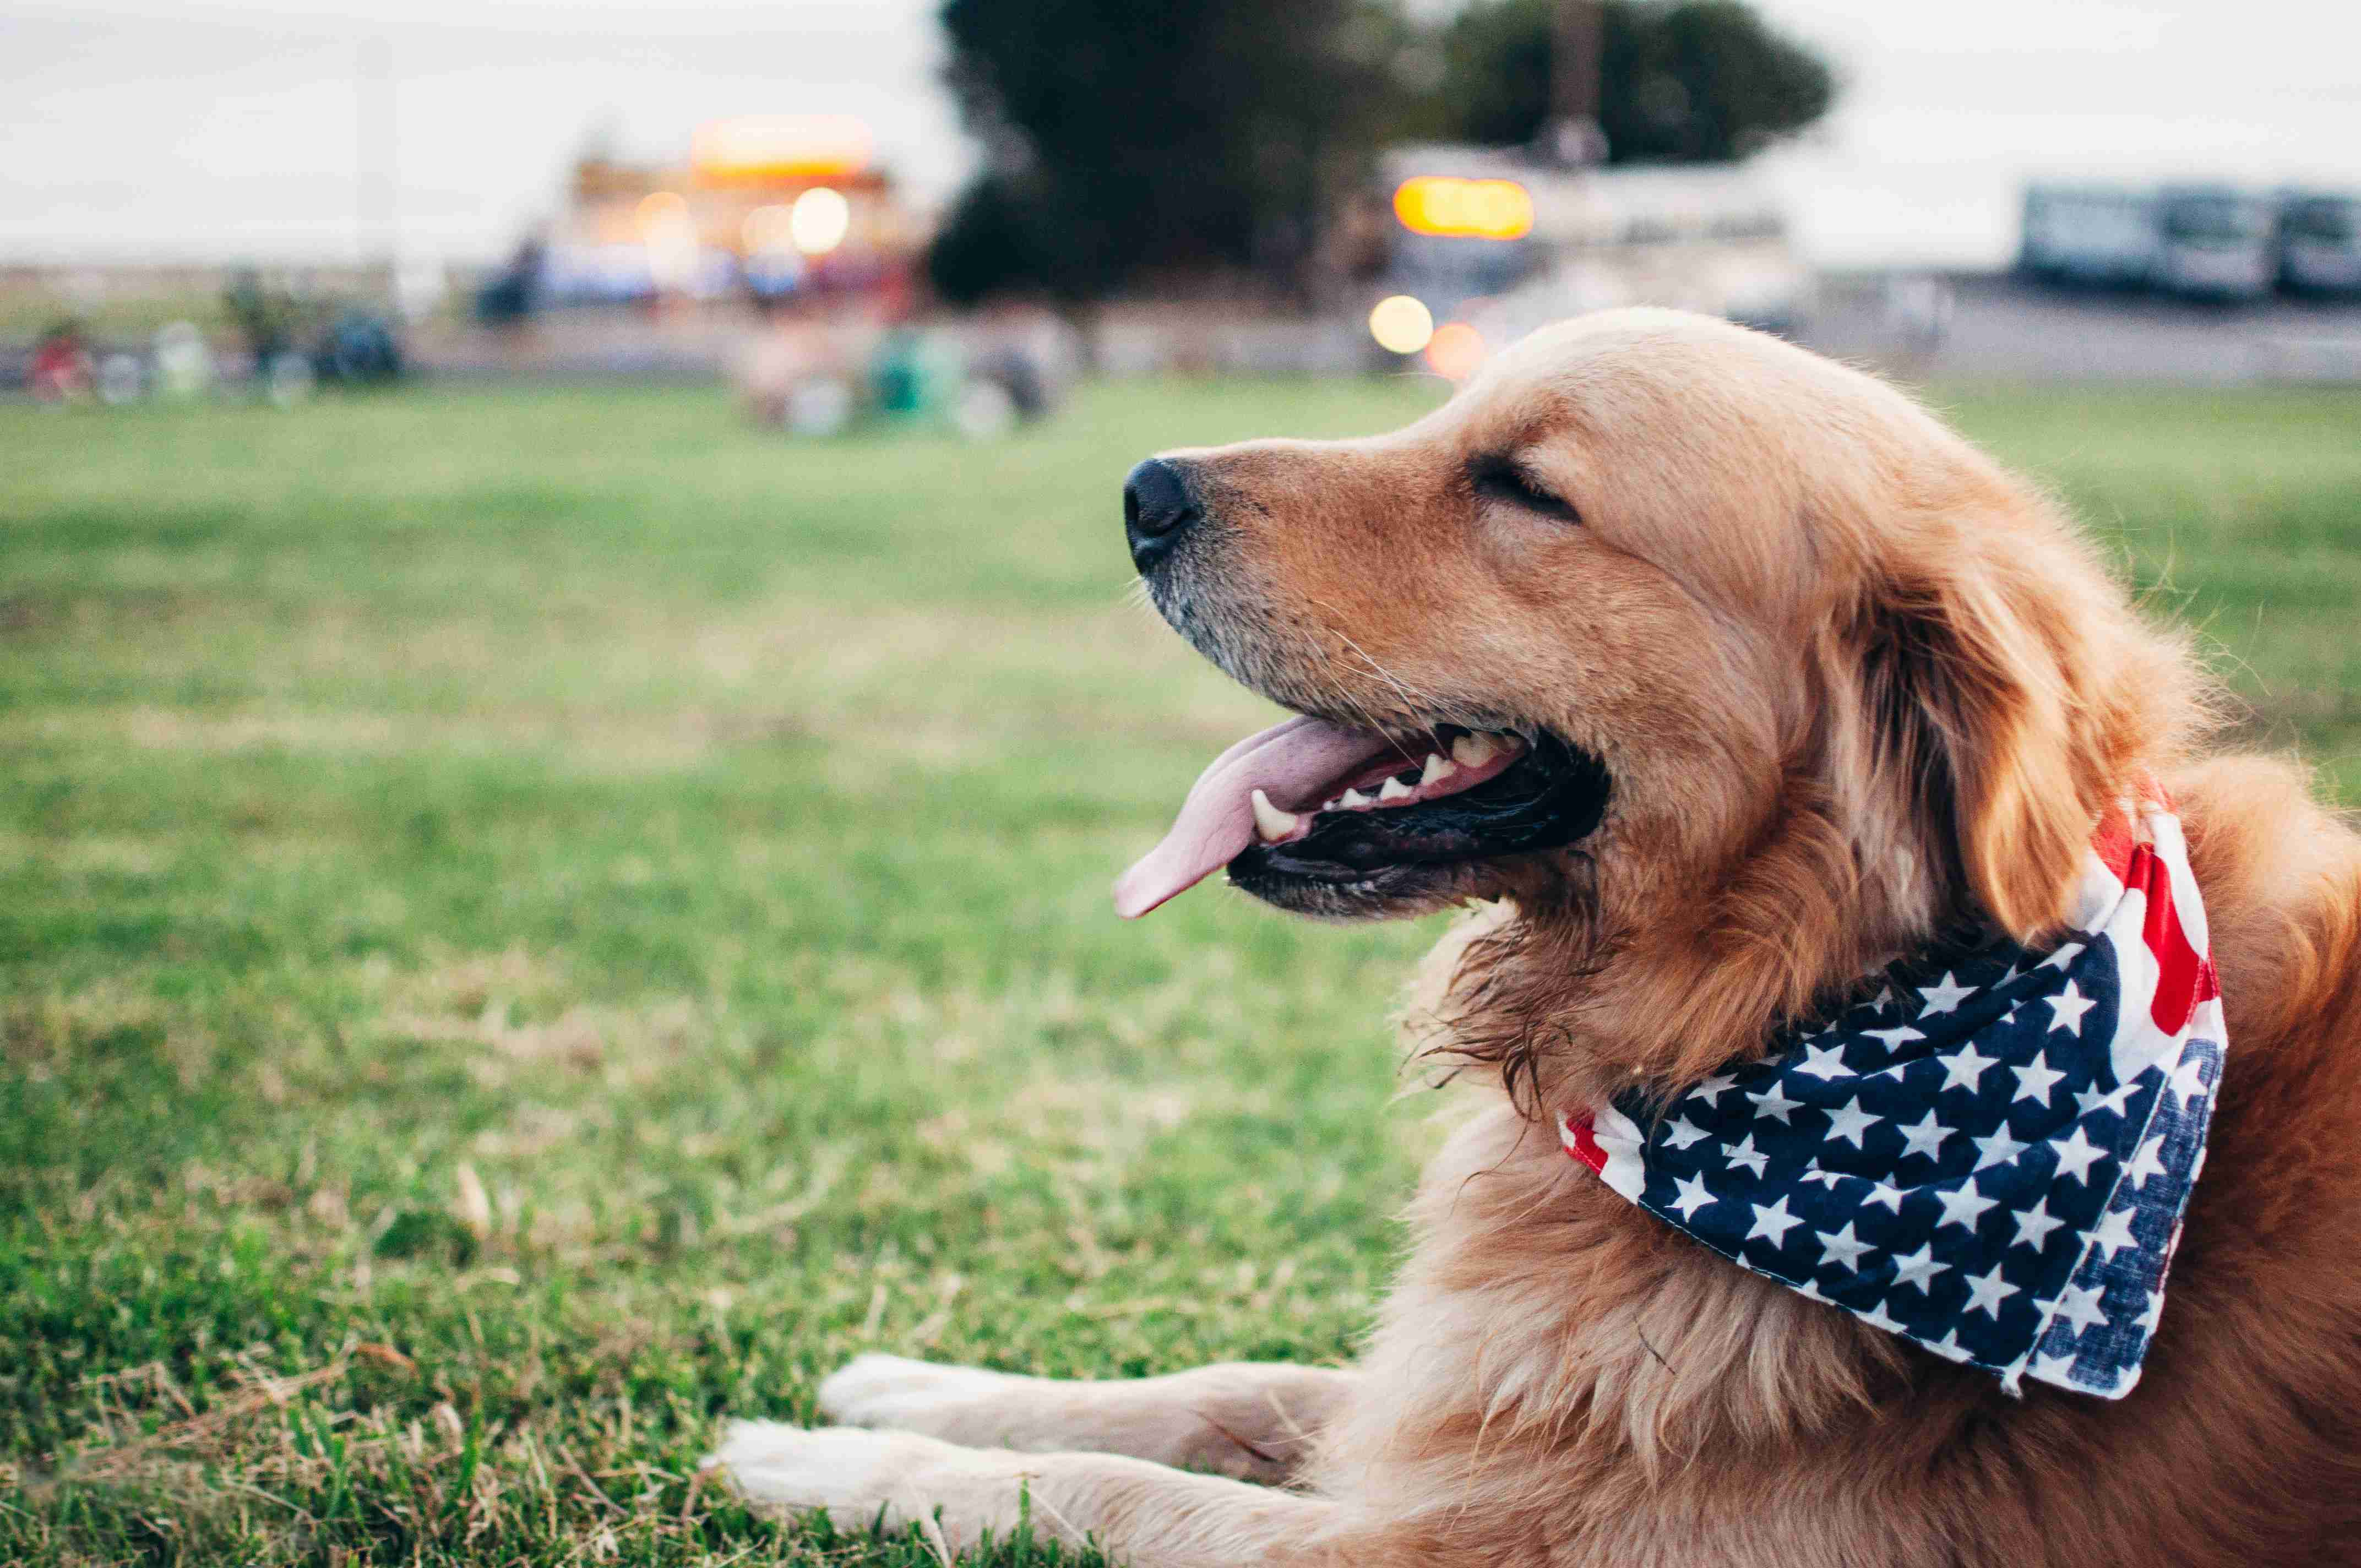 5 Effective Strategies to Help Your Golden Retriever Stay Calm in Stressful Situations